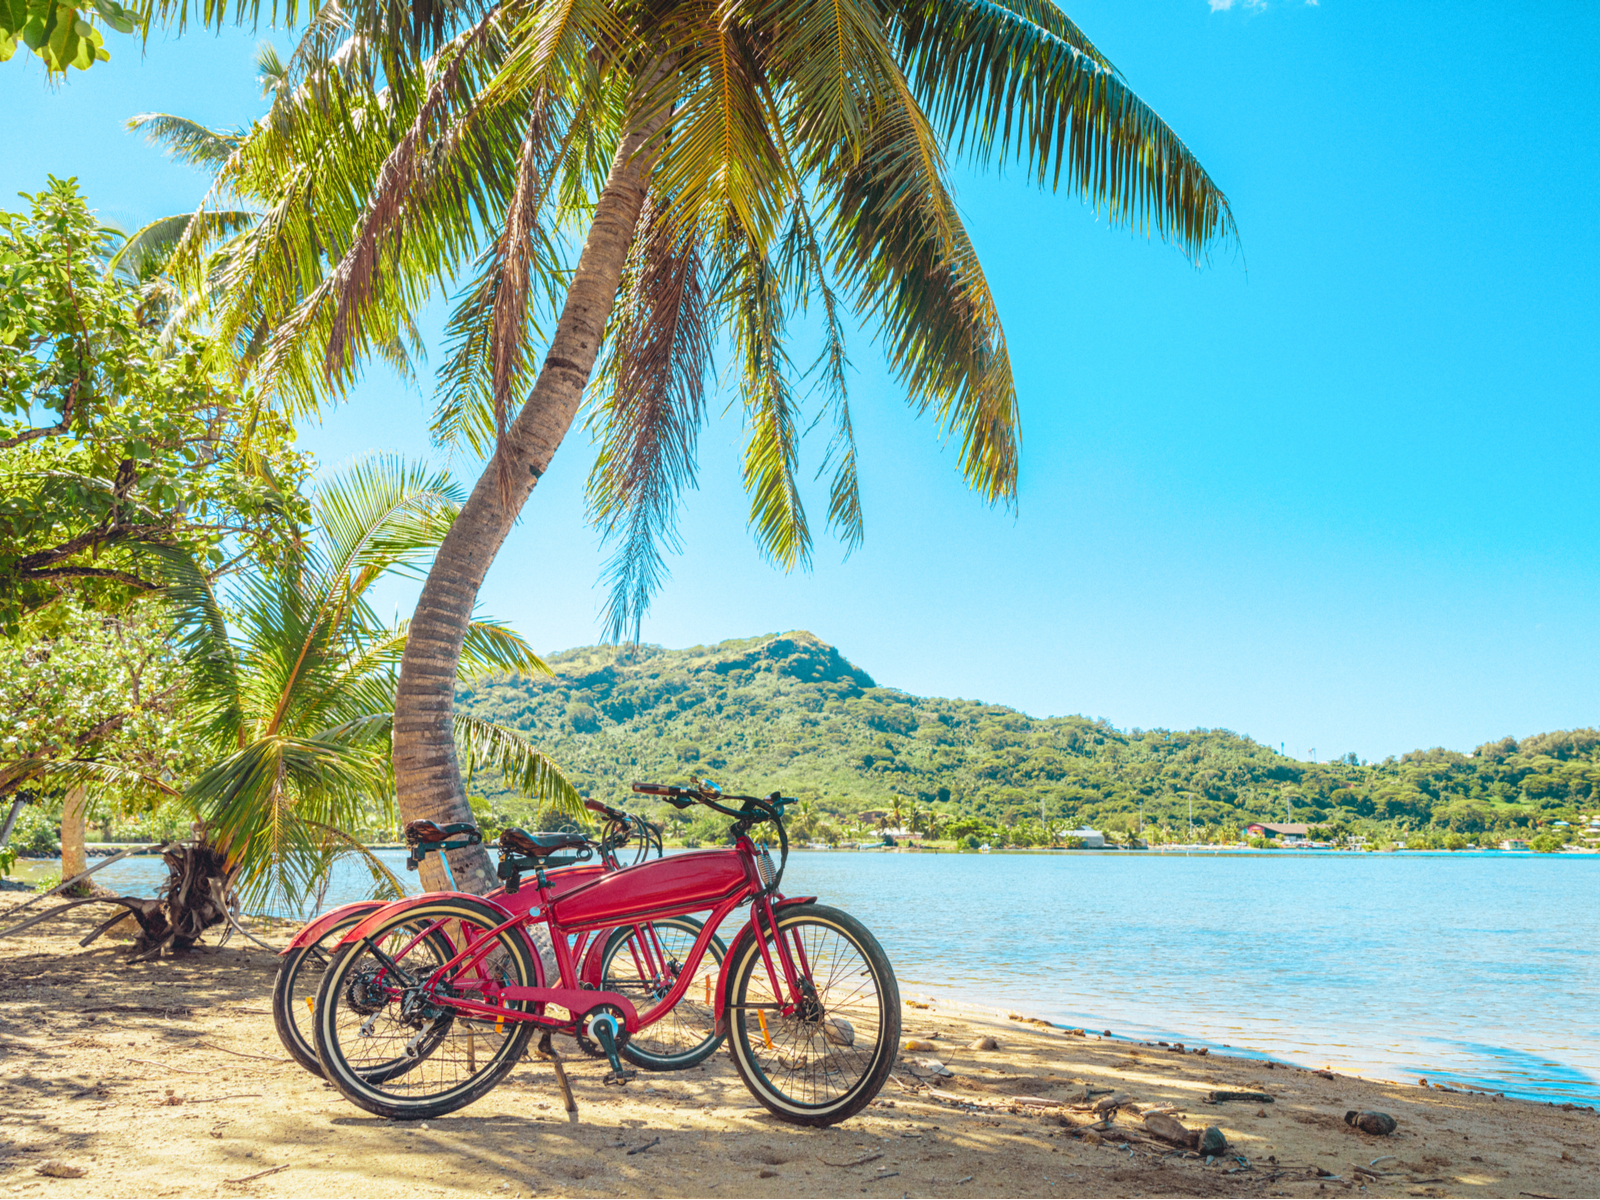 Red bikes on a beach against palm trees for a piece on the least busy time to visit Tahiti